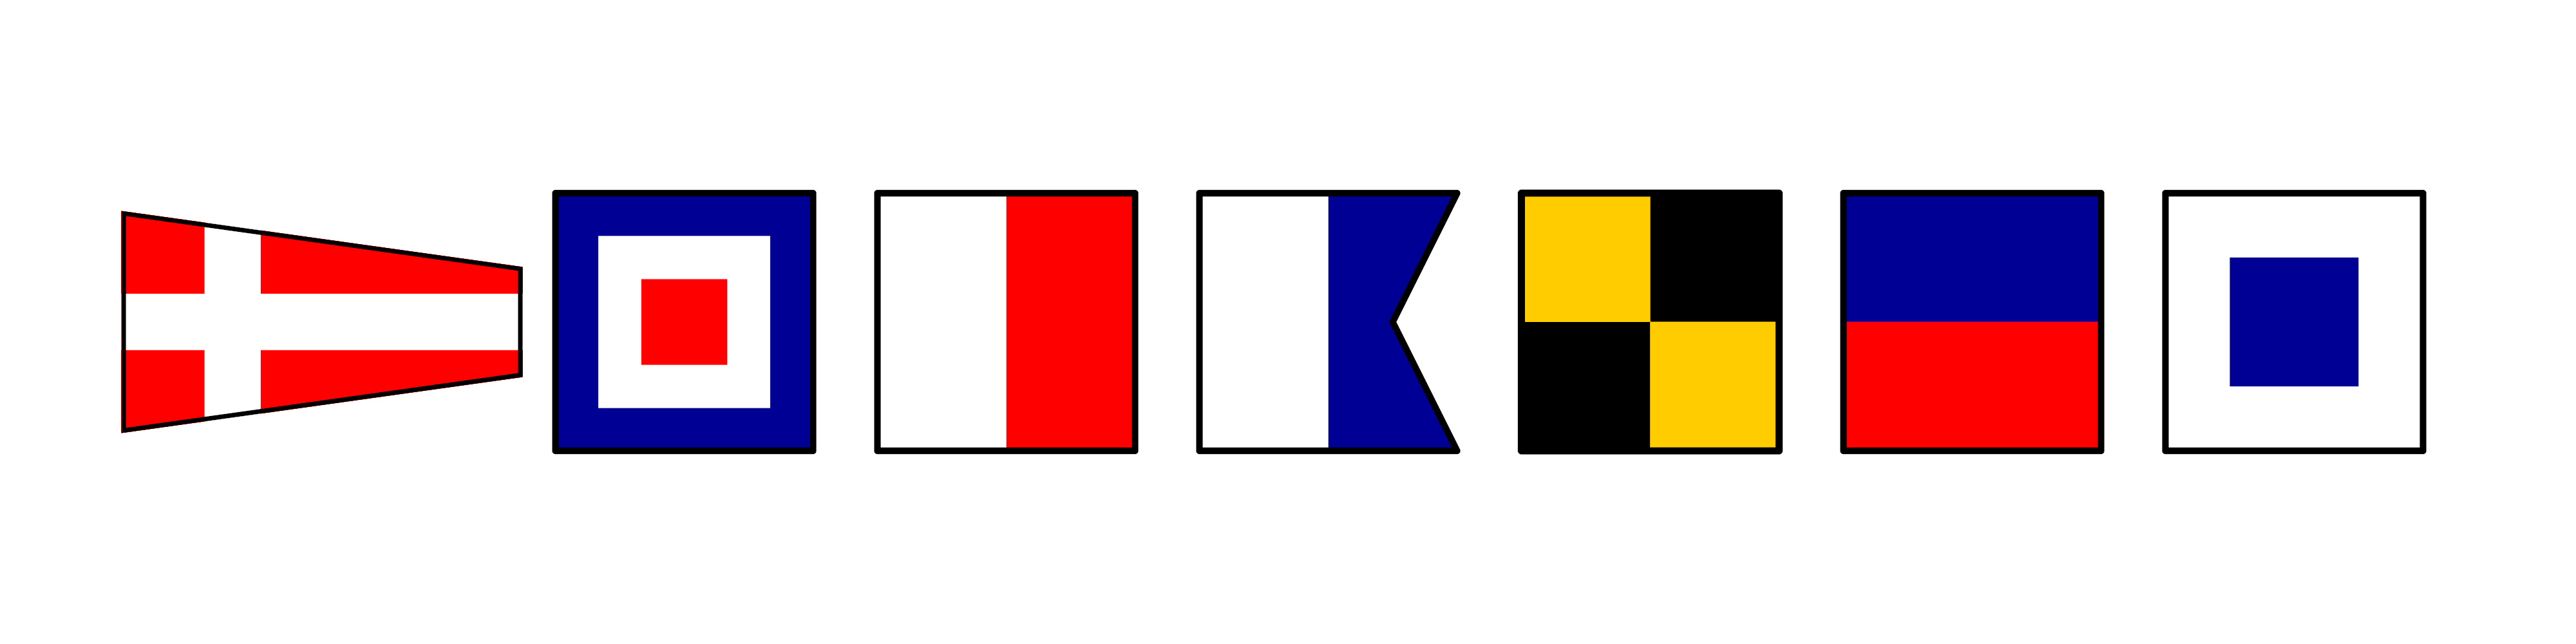 1 red pennant with white cross. 6 square flags follow: 1 blue box white middle & red square center, 2, white left red right, 3, white with blue swallow tail, 4, yellow & black checker, 5, top blue bottom red, 6 white with blue square